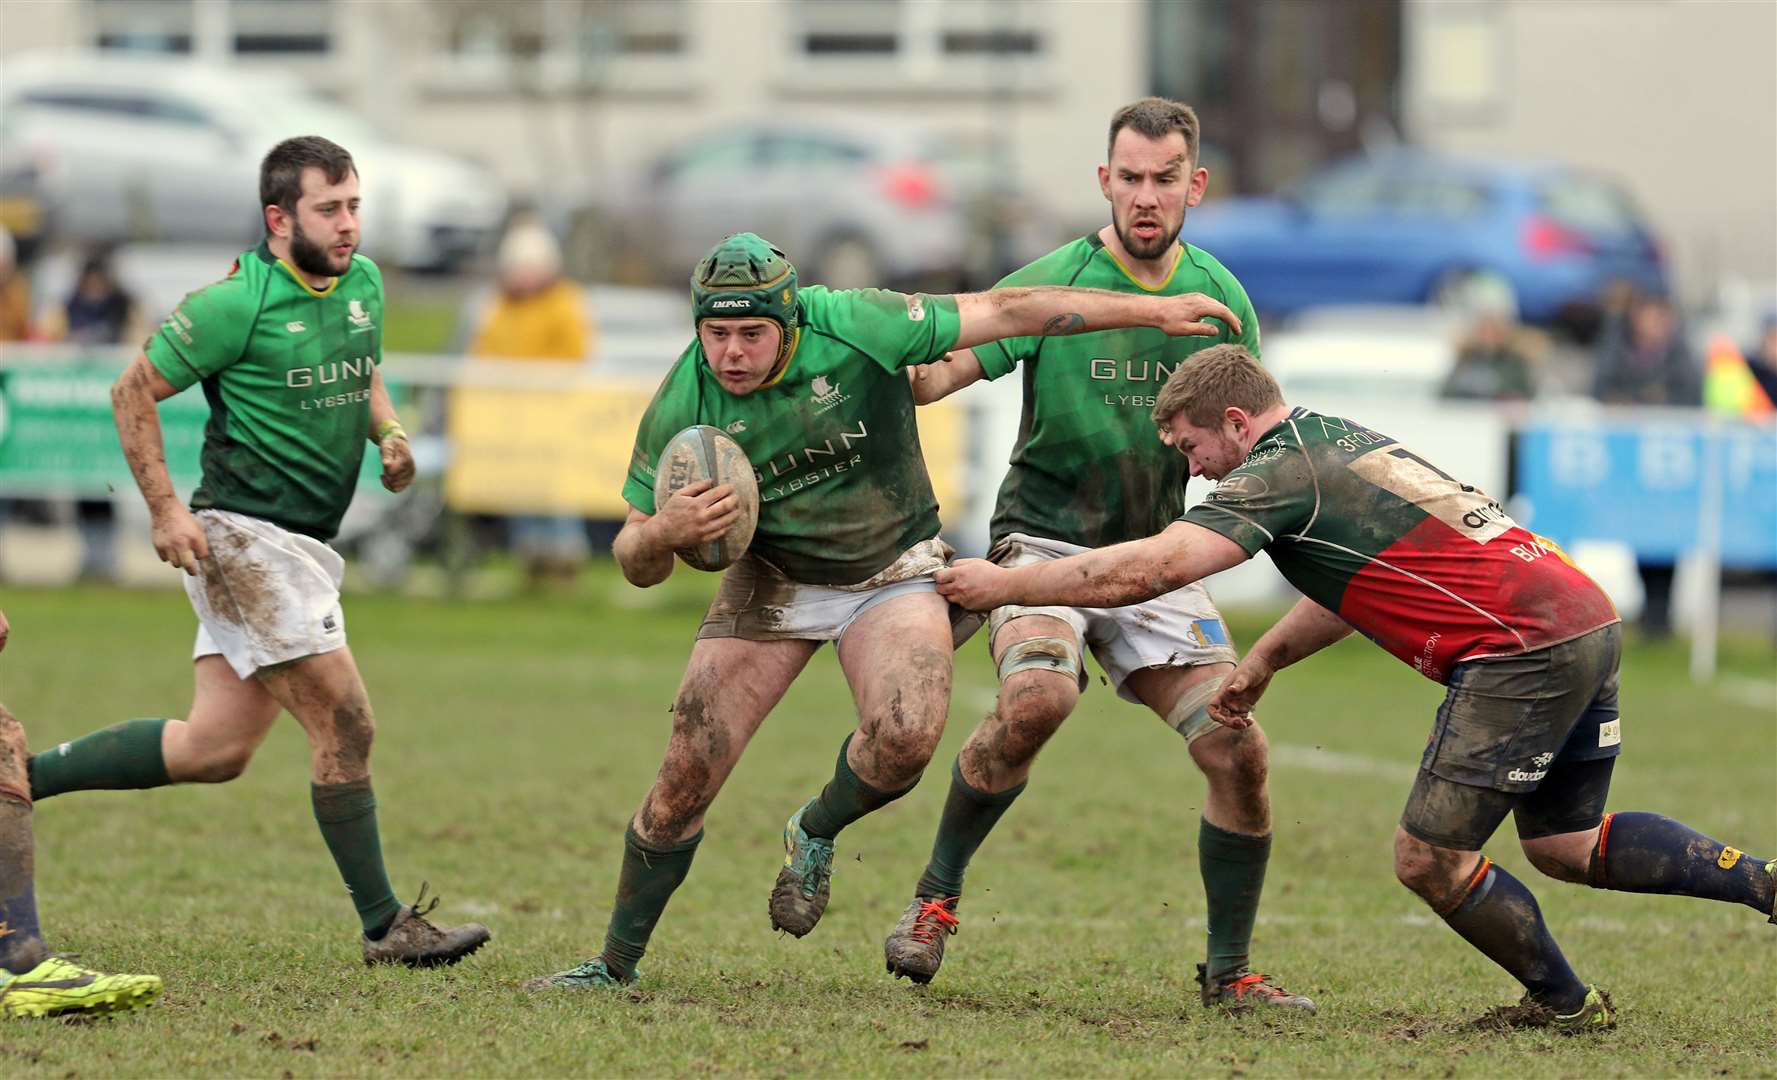 Caithness' Hamish Coghill breaks past Hillhead/Jordanhill prop Darryly Elvin. The 29-12 defeat inflicted on the Millbank side could be the Greens' final match of the season owing to the Coronavirus outbreak. Picture: James Gunn